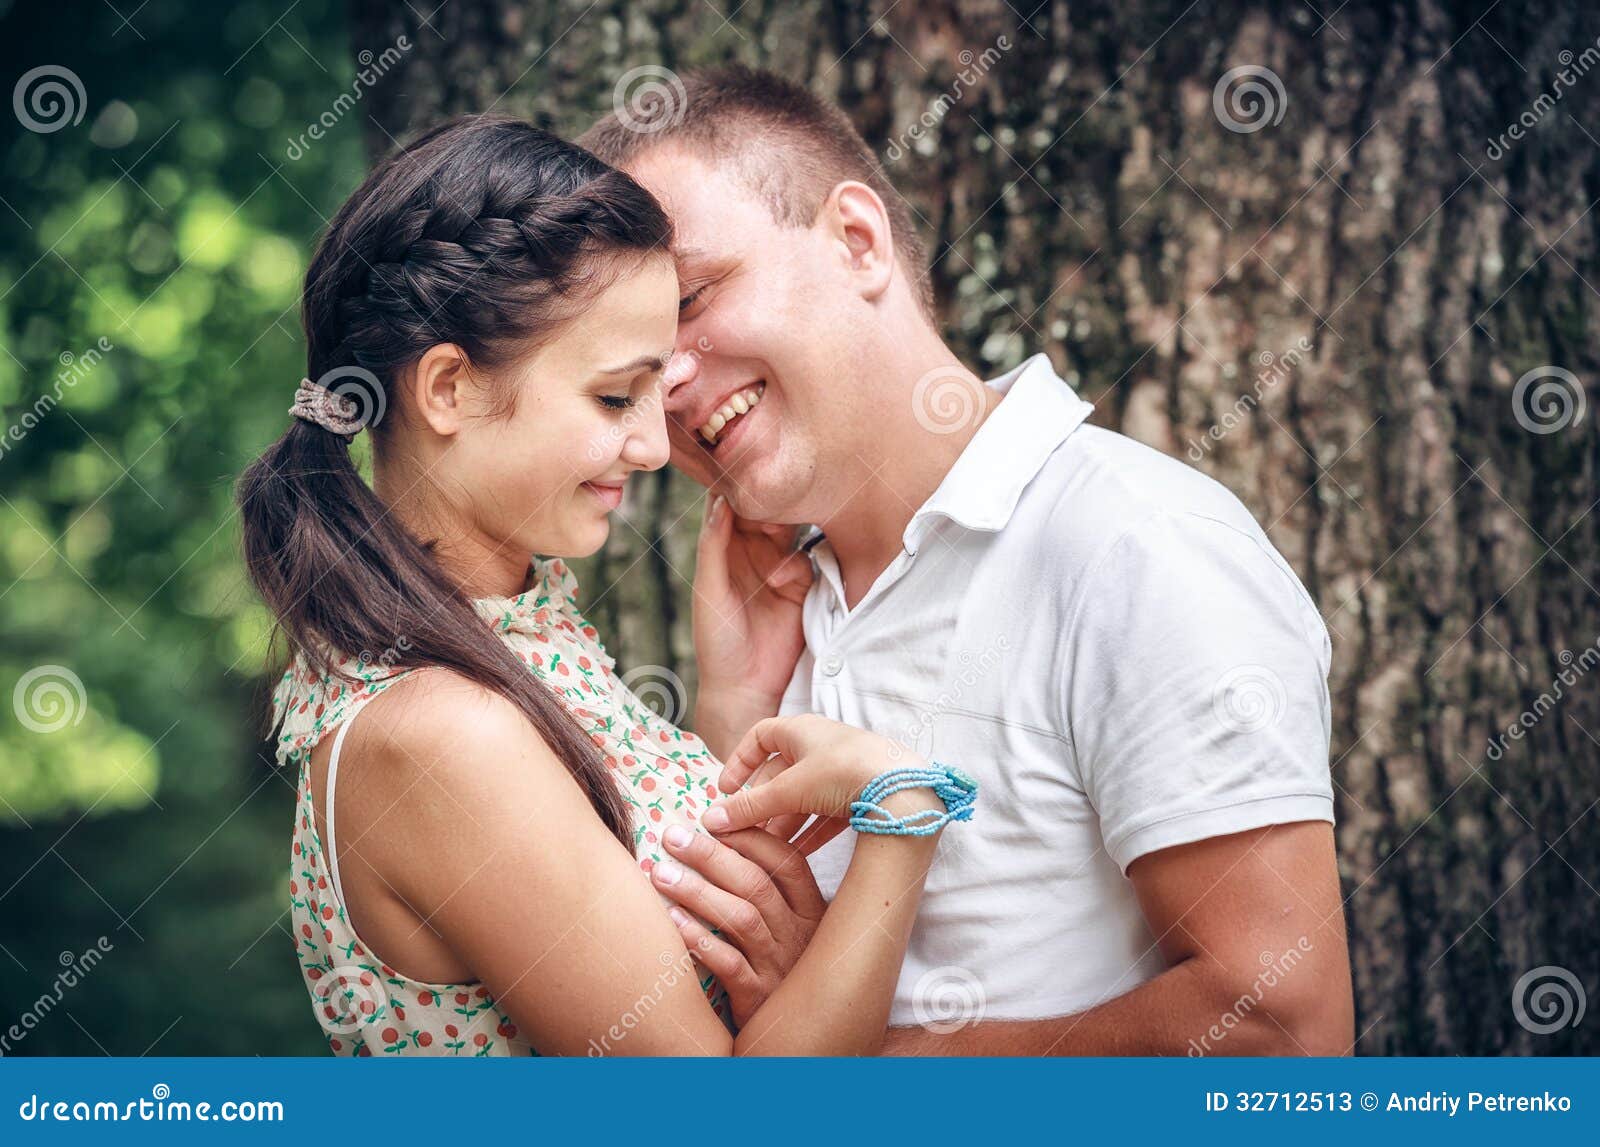 Love And Affection Between A Young Couple Stock Image Image Of Cheek